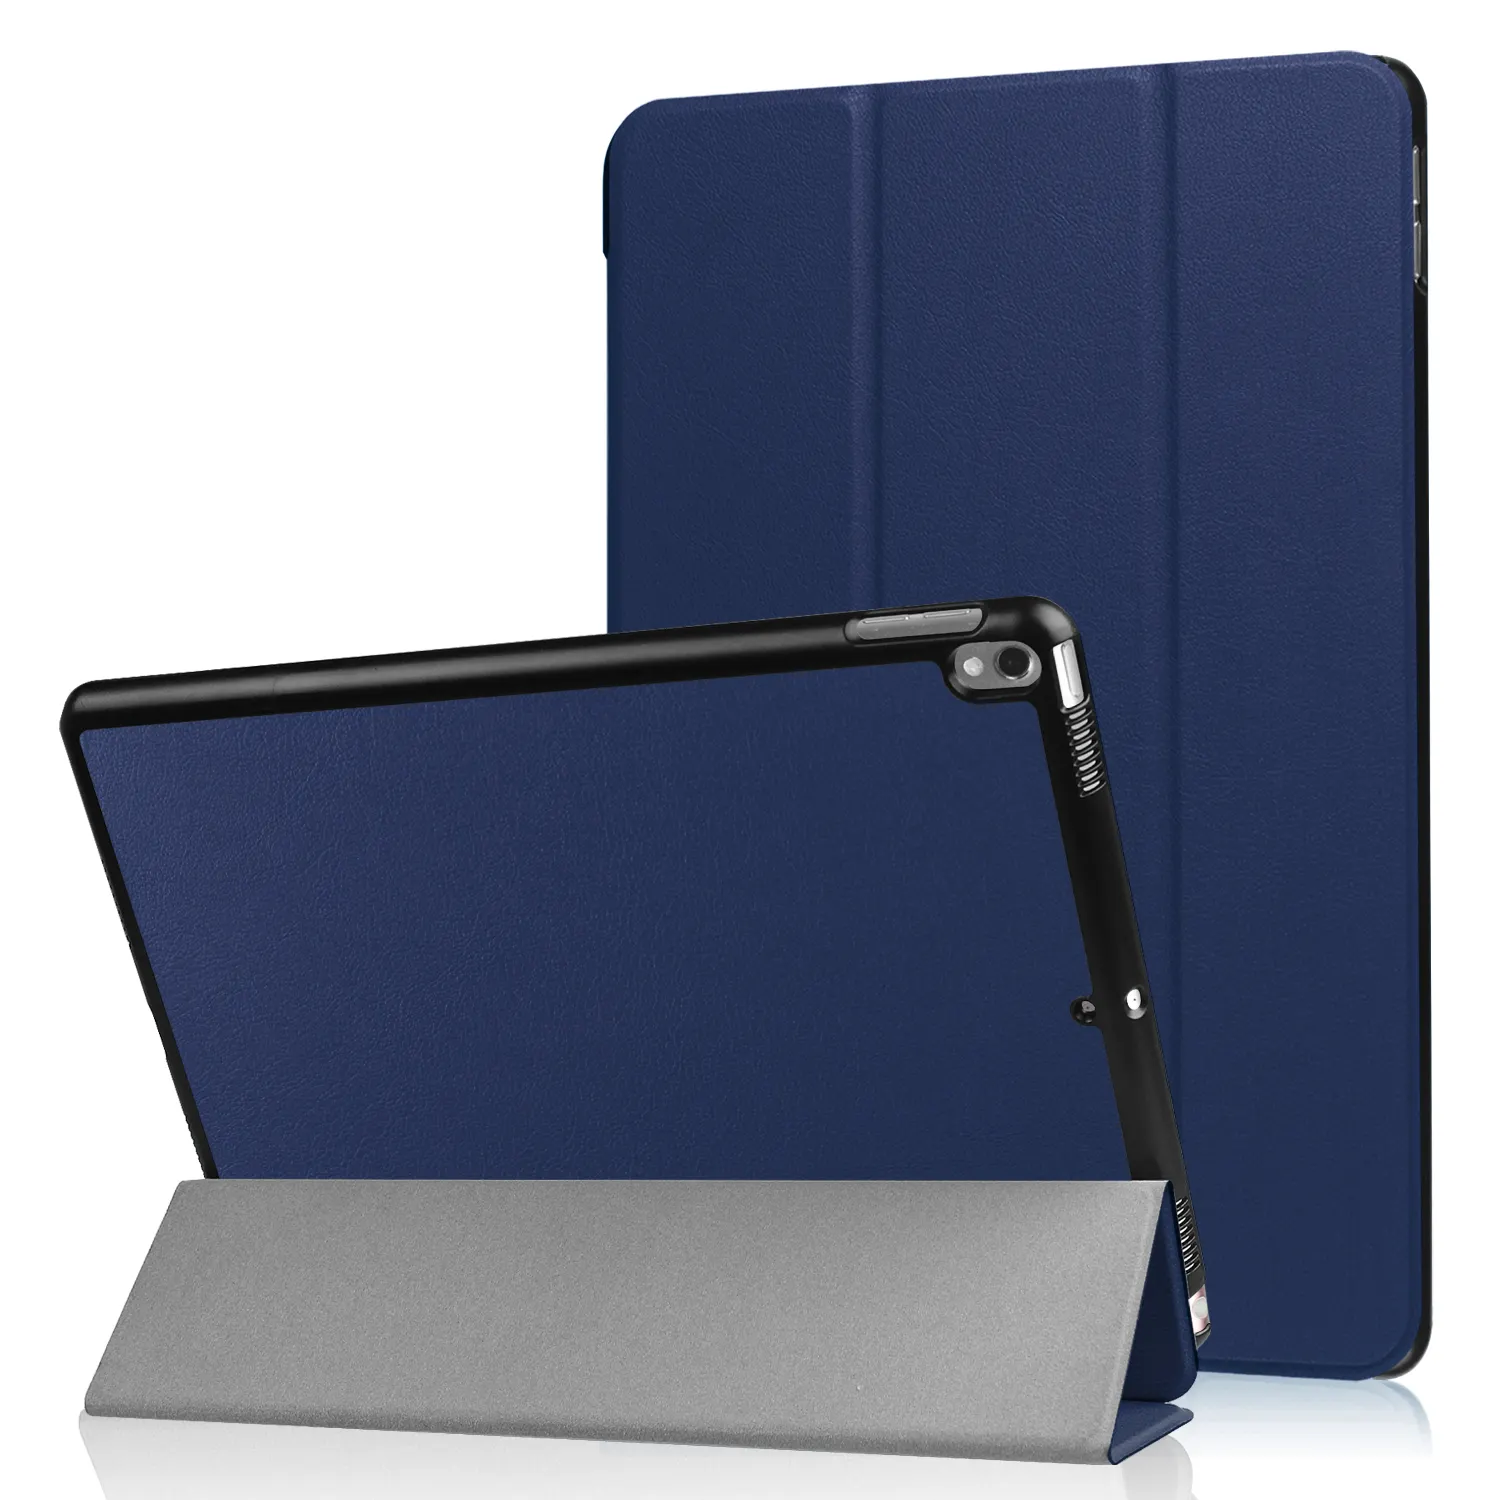 Slim Trifold Stand PU Leather Flip Cover Tablet Case Shell for iPad Air 3 10.5 2019 Smart Cover for iPad Pro 10.5 2017